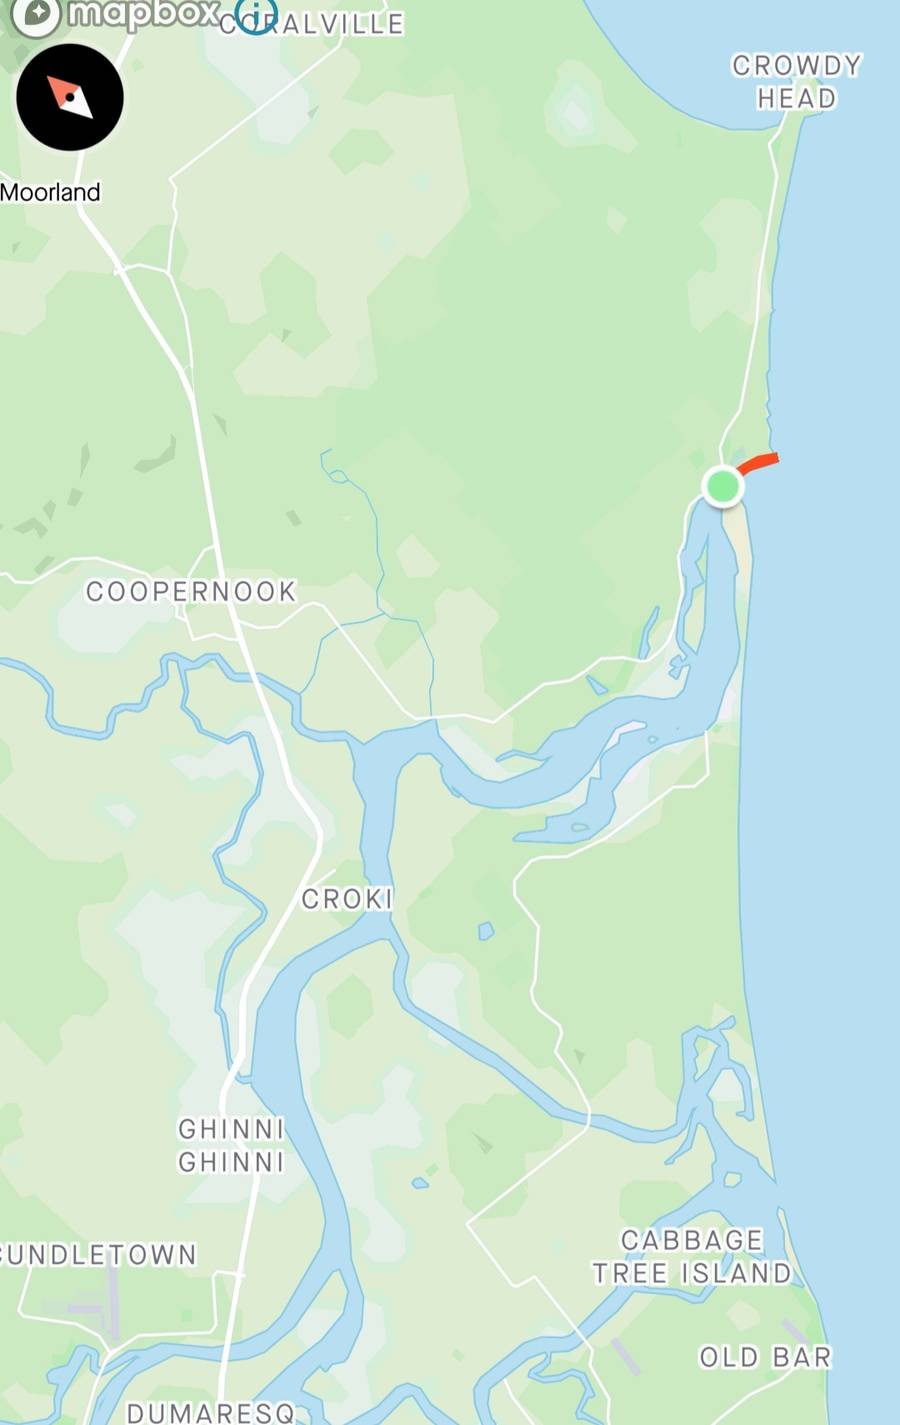 The Manning River is the only Dual river system with two river mouths opening into the ocean in the Southern Hemisphere.                   Strava map screenshot.